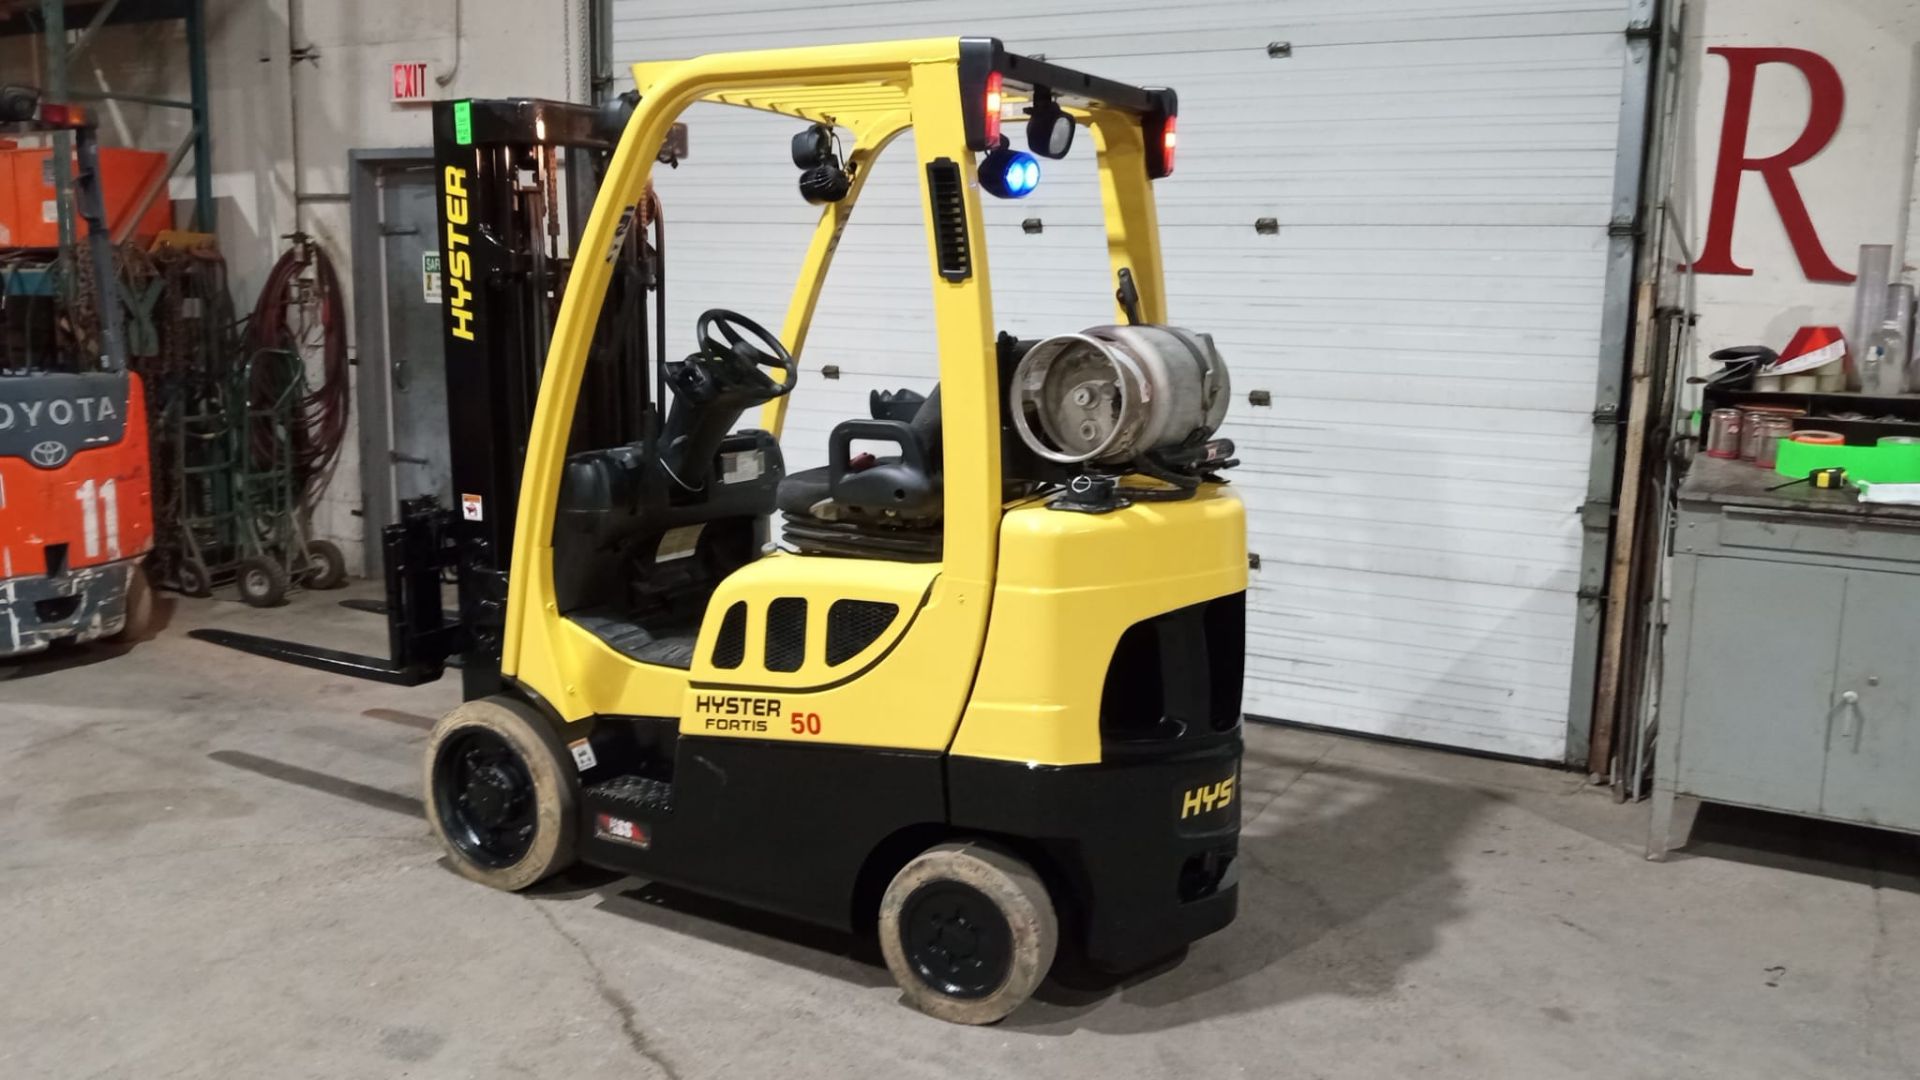 2016 HYSTER 5,000lbs Capacity LPG (Propane) Forklift with sideshift & 3-STAGE MAST & Non Marking - Image 3 of 5